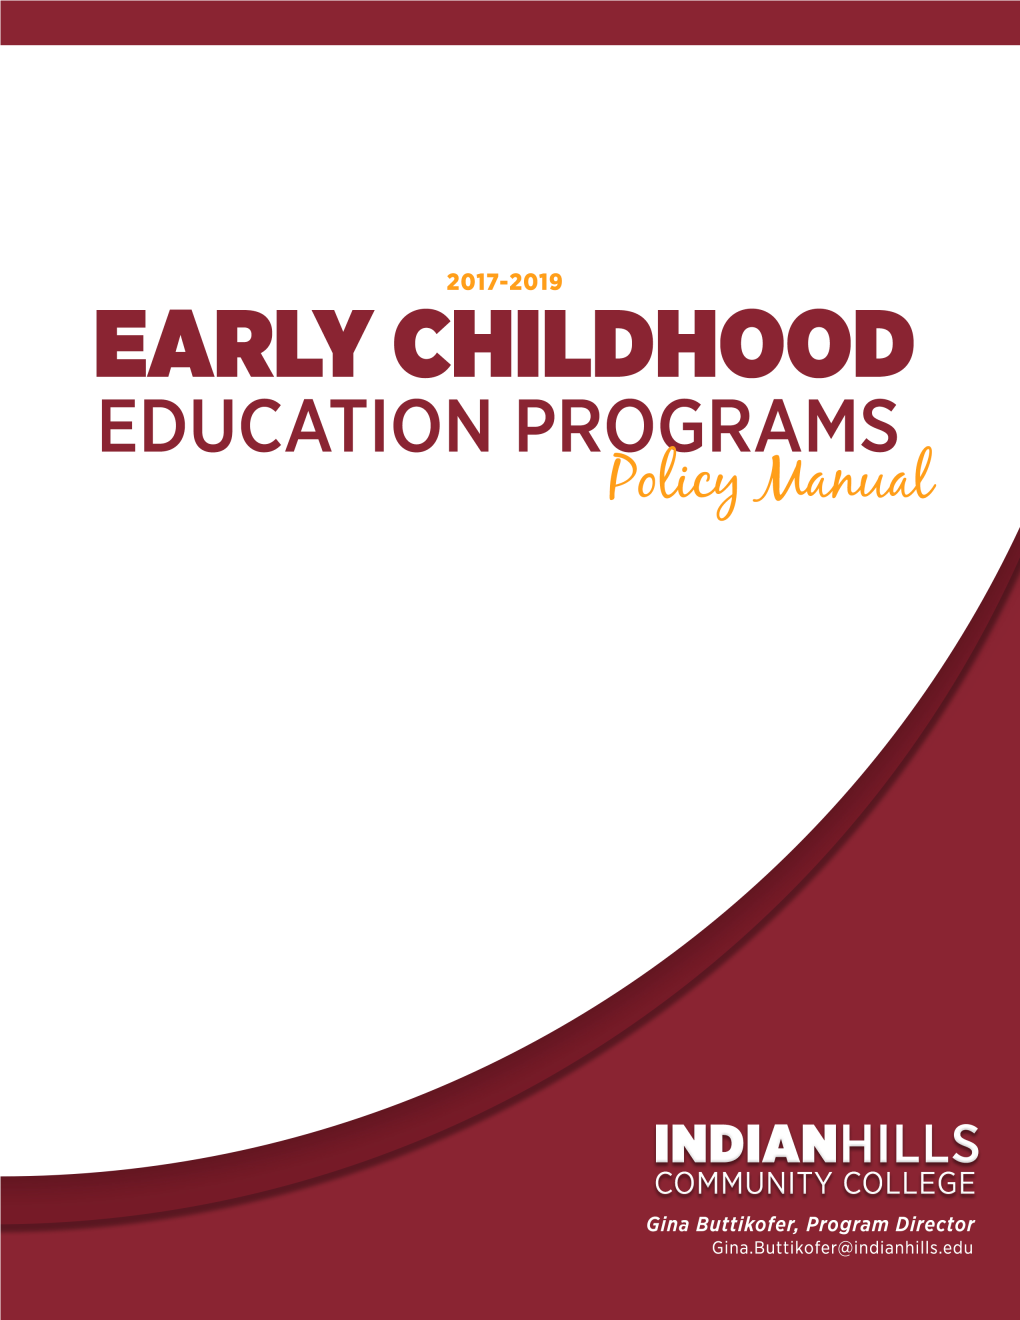 Early Childhood Education Programs Policy Manual